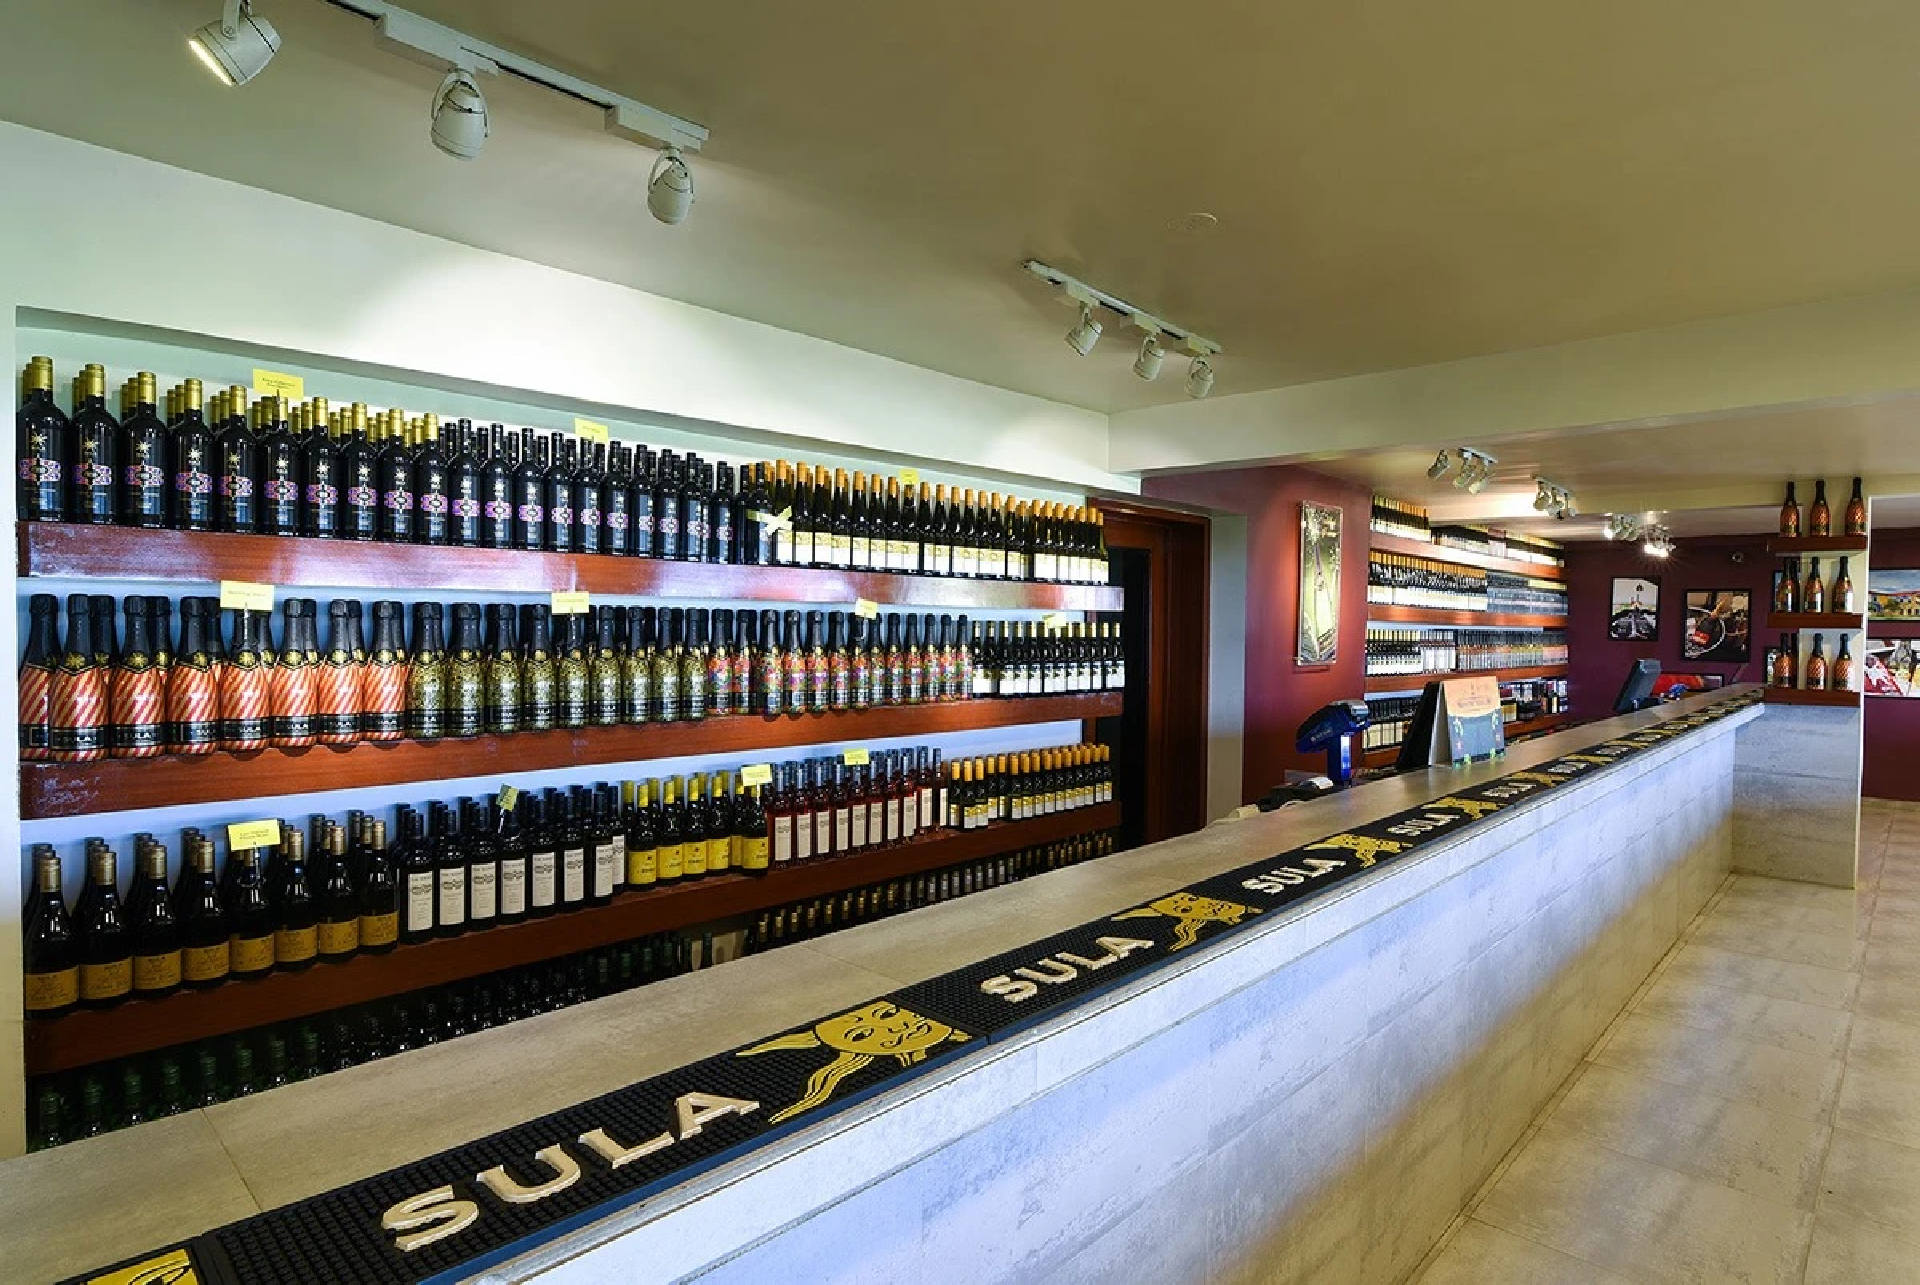 You can choose our curated wine selection and collect them at Sula Vineyards' Bottle Shop